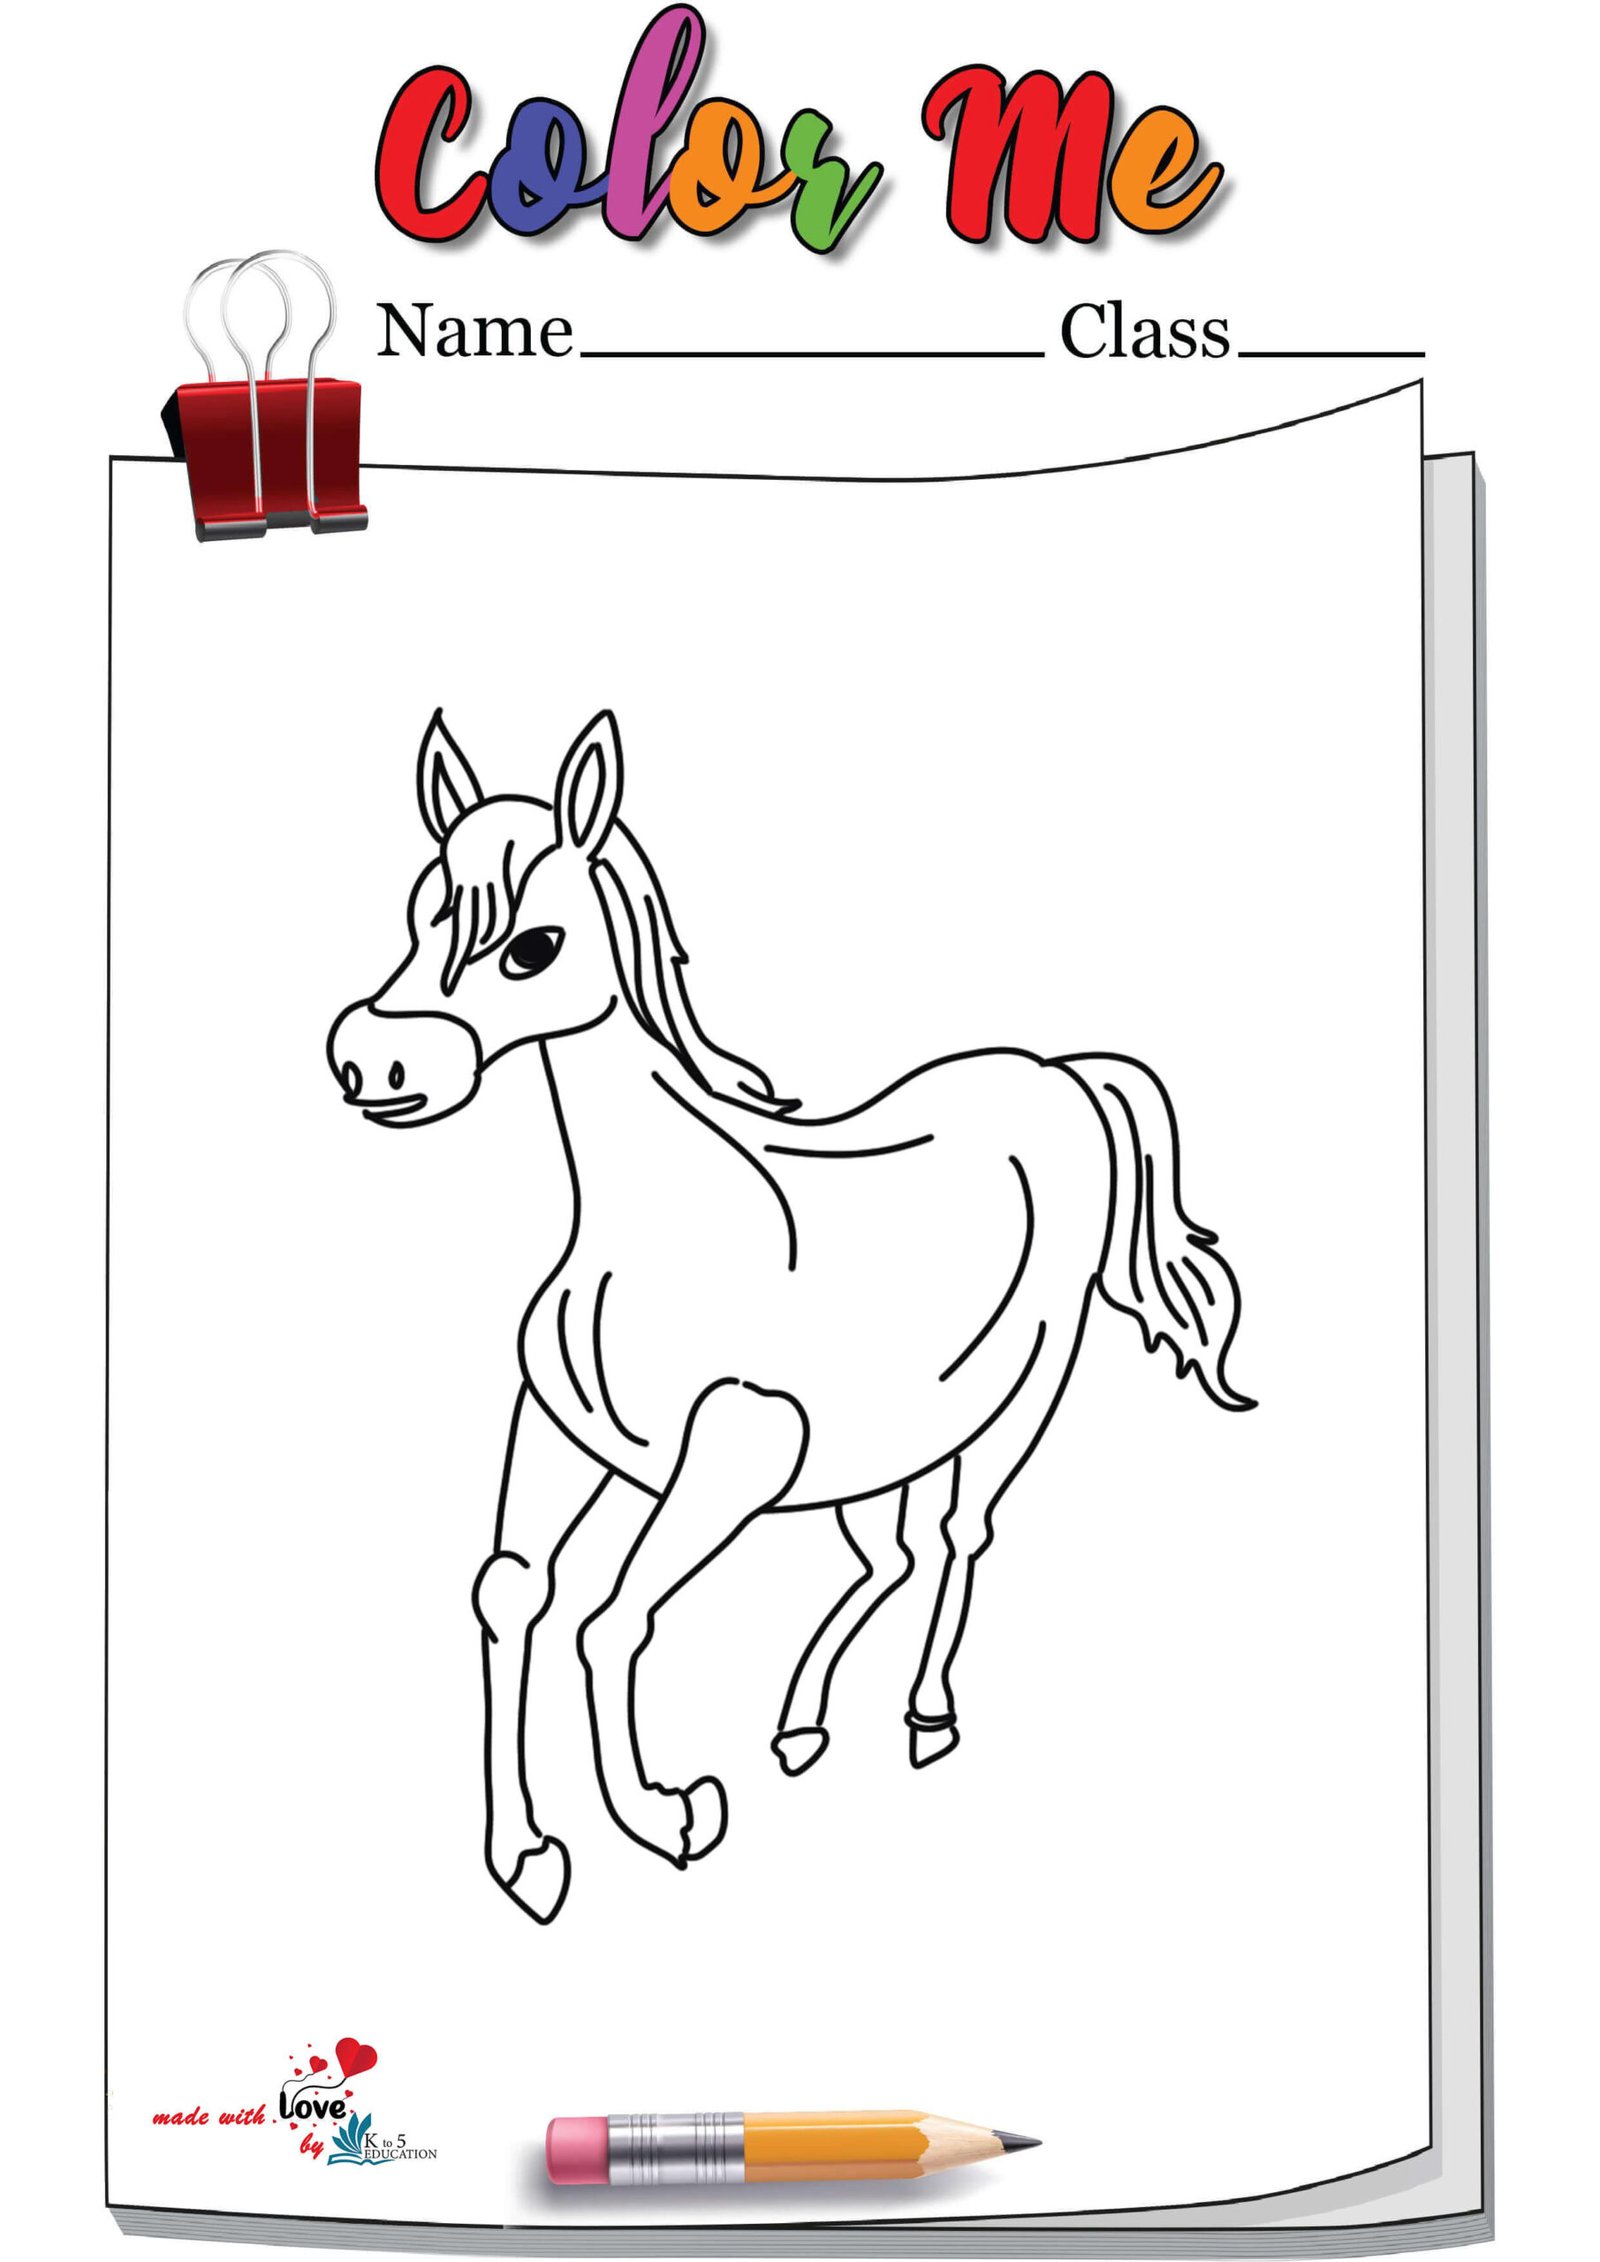 Running Horse Coloring Page